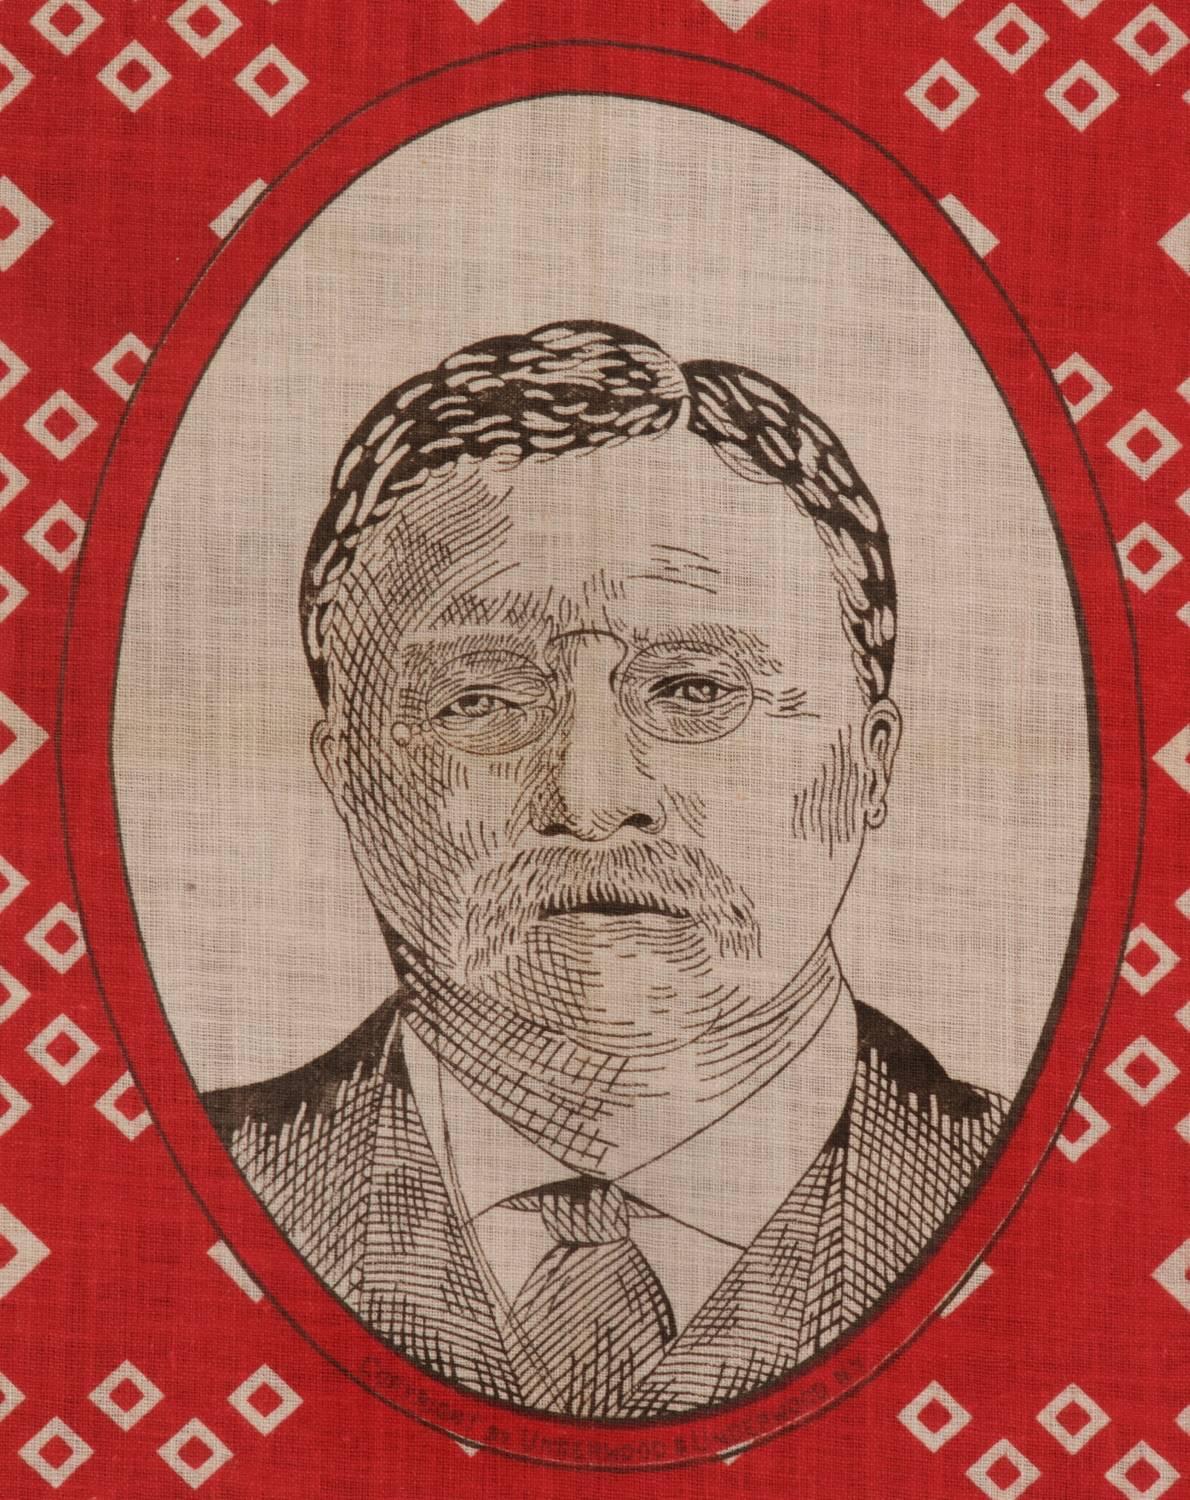 American Roosevelt Battle Flag Kerchief, Made for the 1912 Presidential Campaign